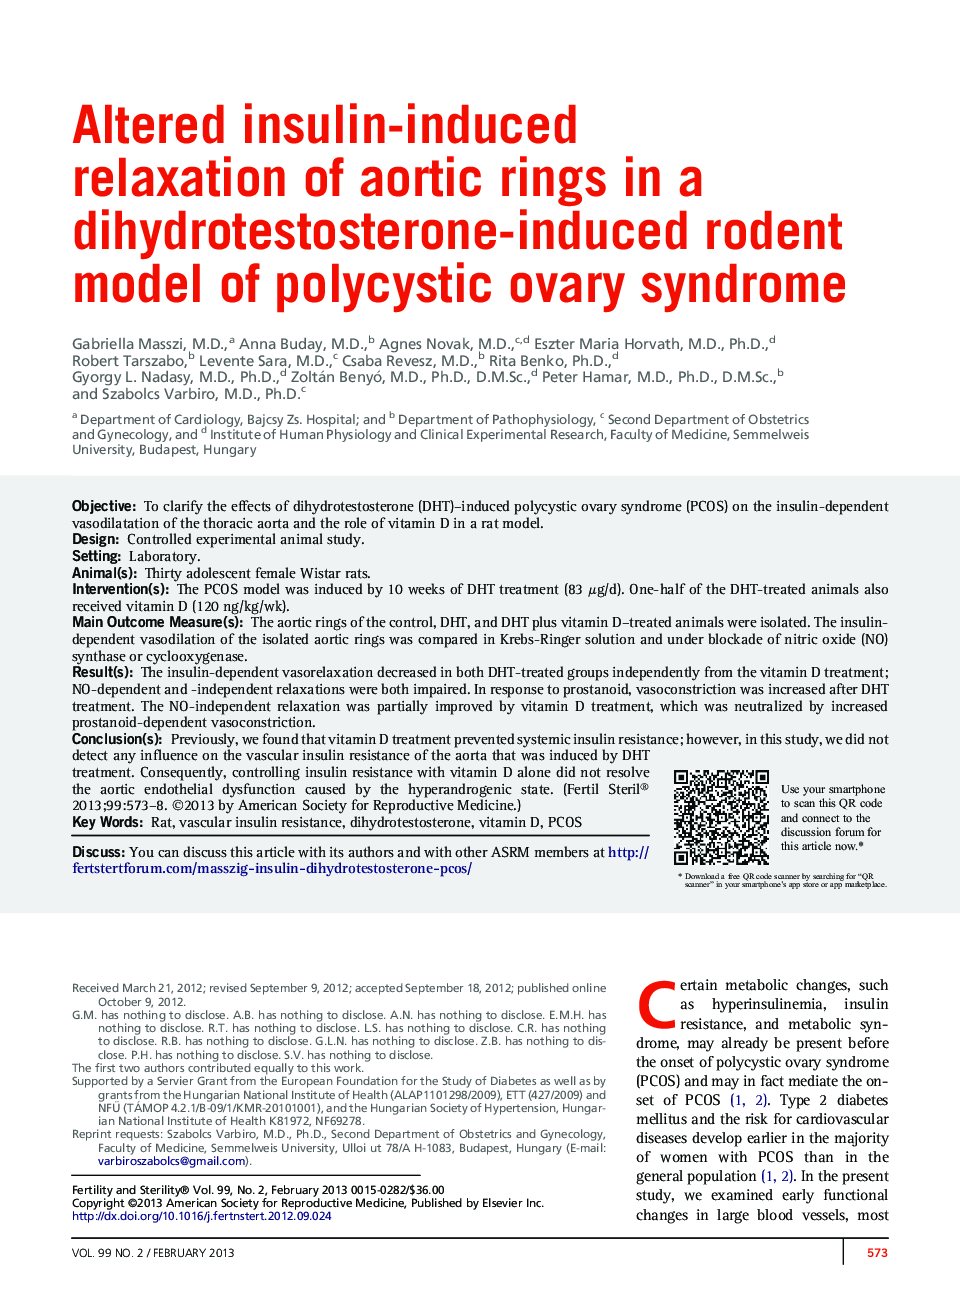 Altered insulin-induced relaxation of aortic rings in a dihydrotestosterone-induced rodent model of polycystic ovary syndrome 